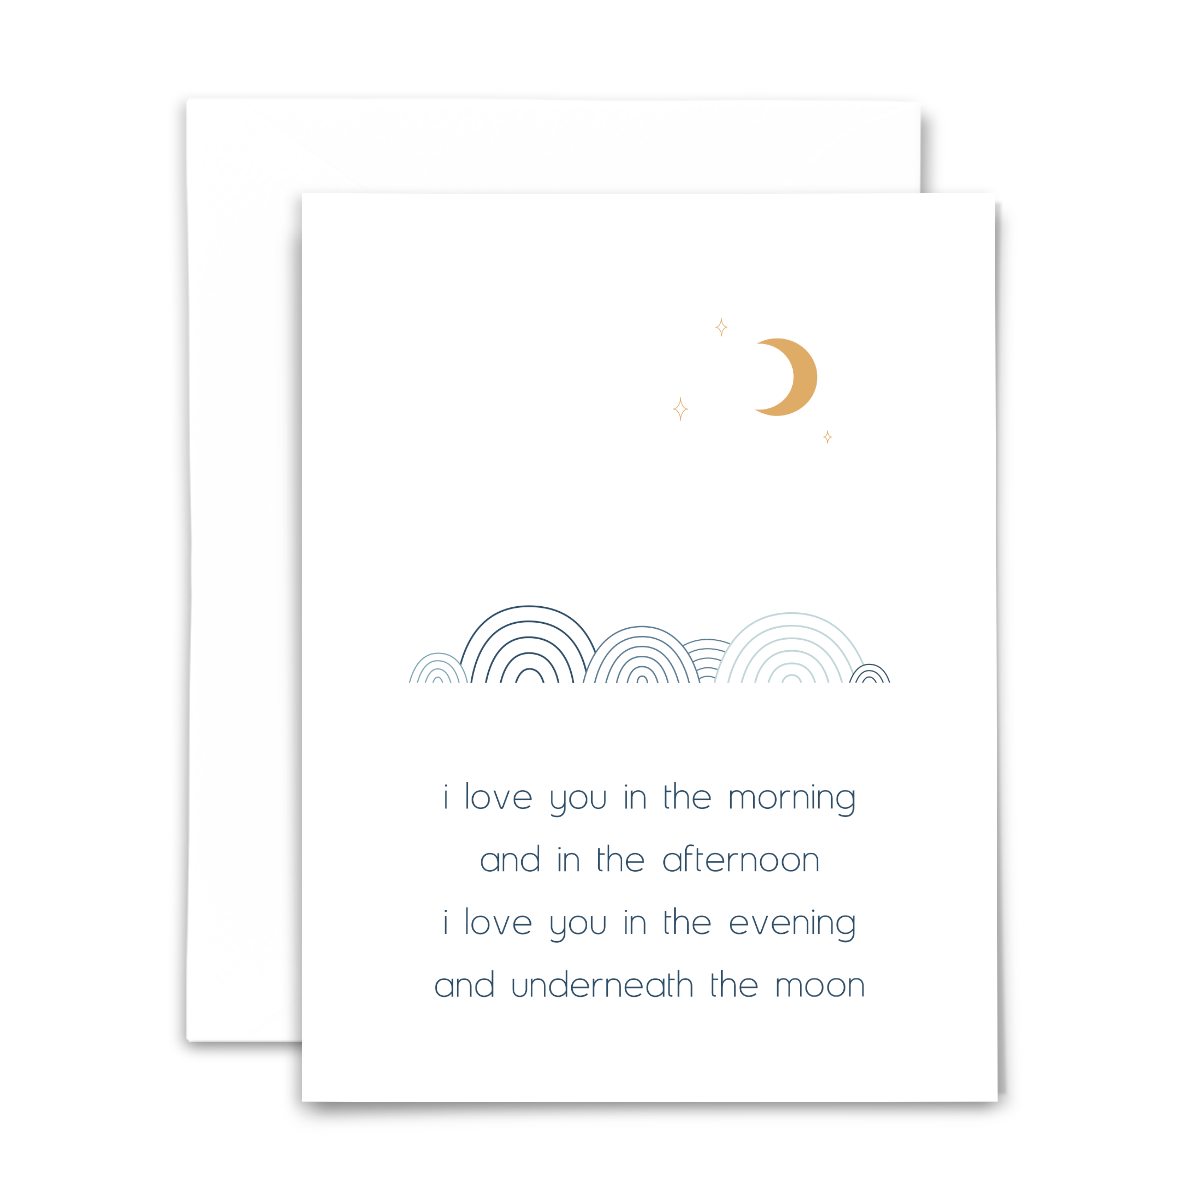 "I love you in the morning And in the afternoon, I love you in the evening And underneath the moon" blank greeting card. Simple blue wave line art with golden sun and blue lettering on white background; with white envelope